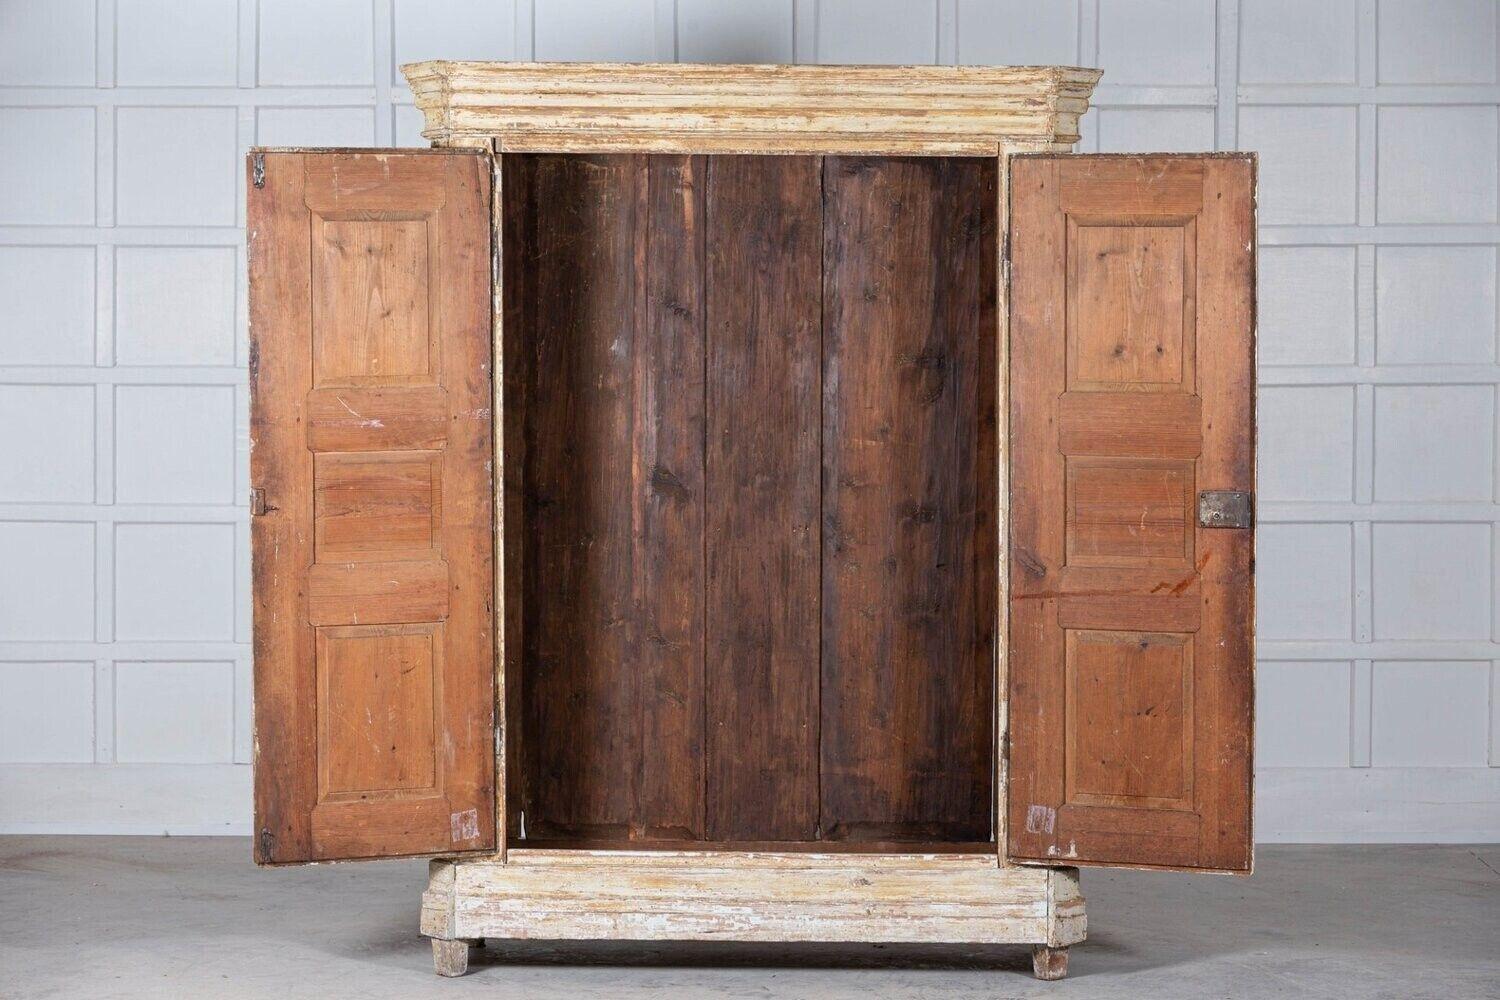 circa 1820
19thC French Painted Pine Armoire
Original yellow ochre paint raised on 4 feet with lovely panelled doors & sides. 3 hooks, heart shaped escutcheon and original iron key. Knockdown
Exceptional colour
( Hanging rail or shelves could be